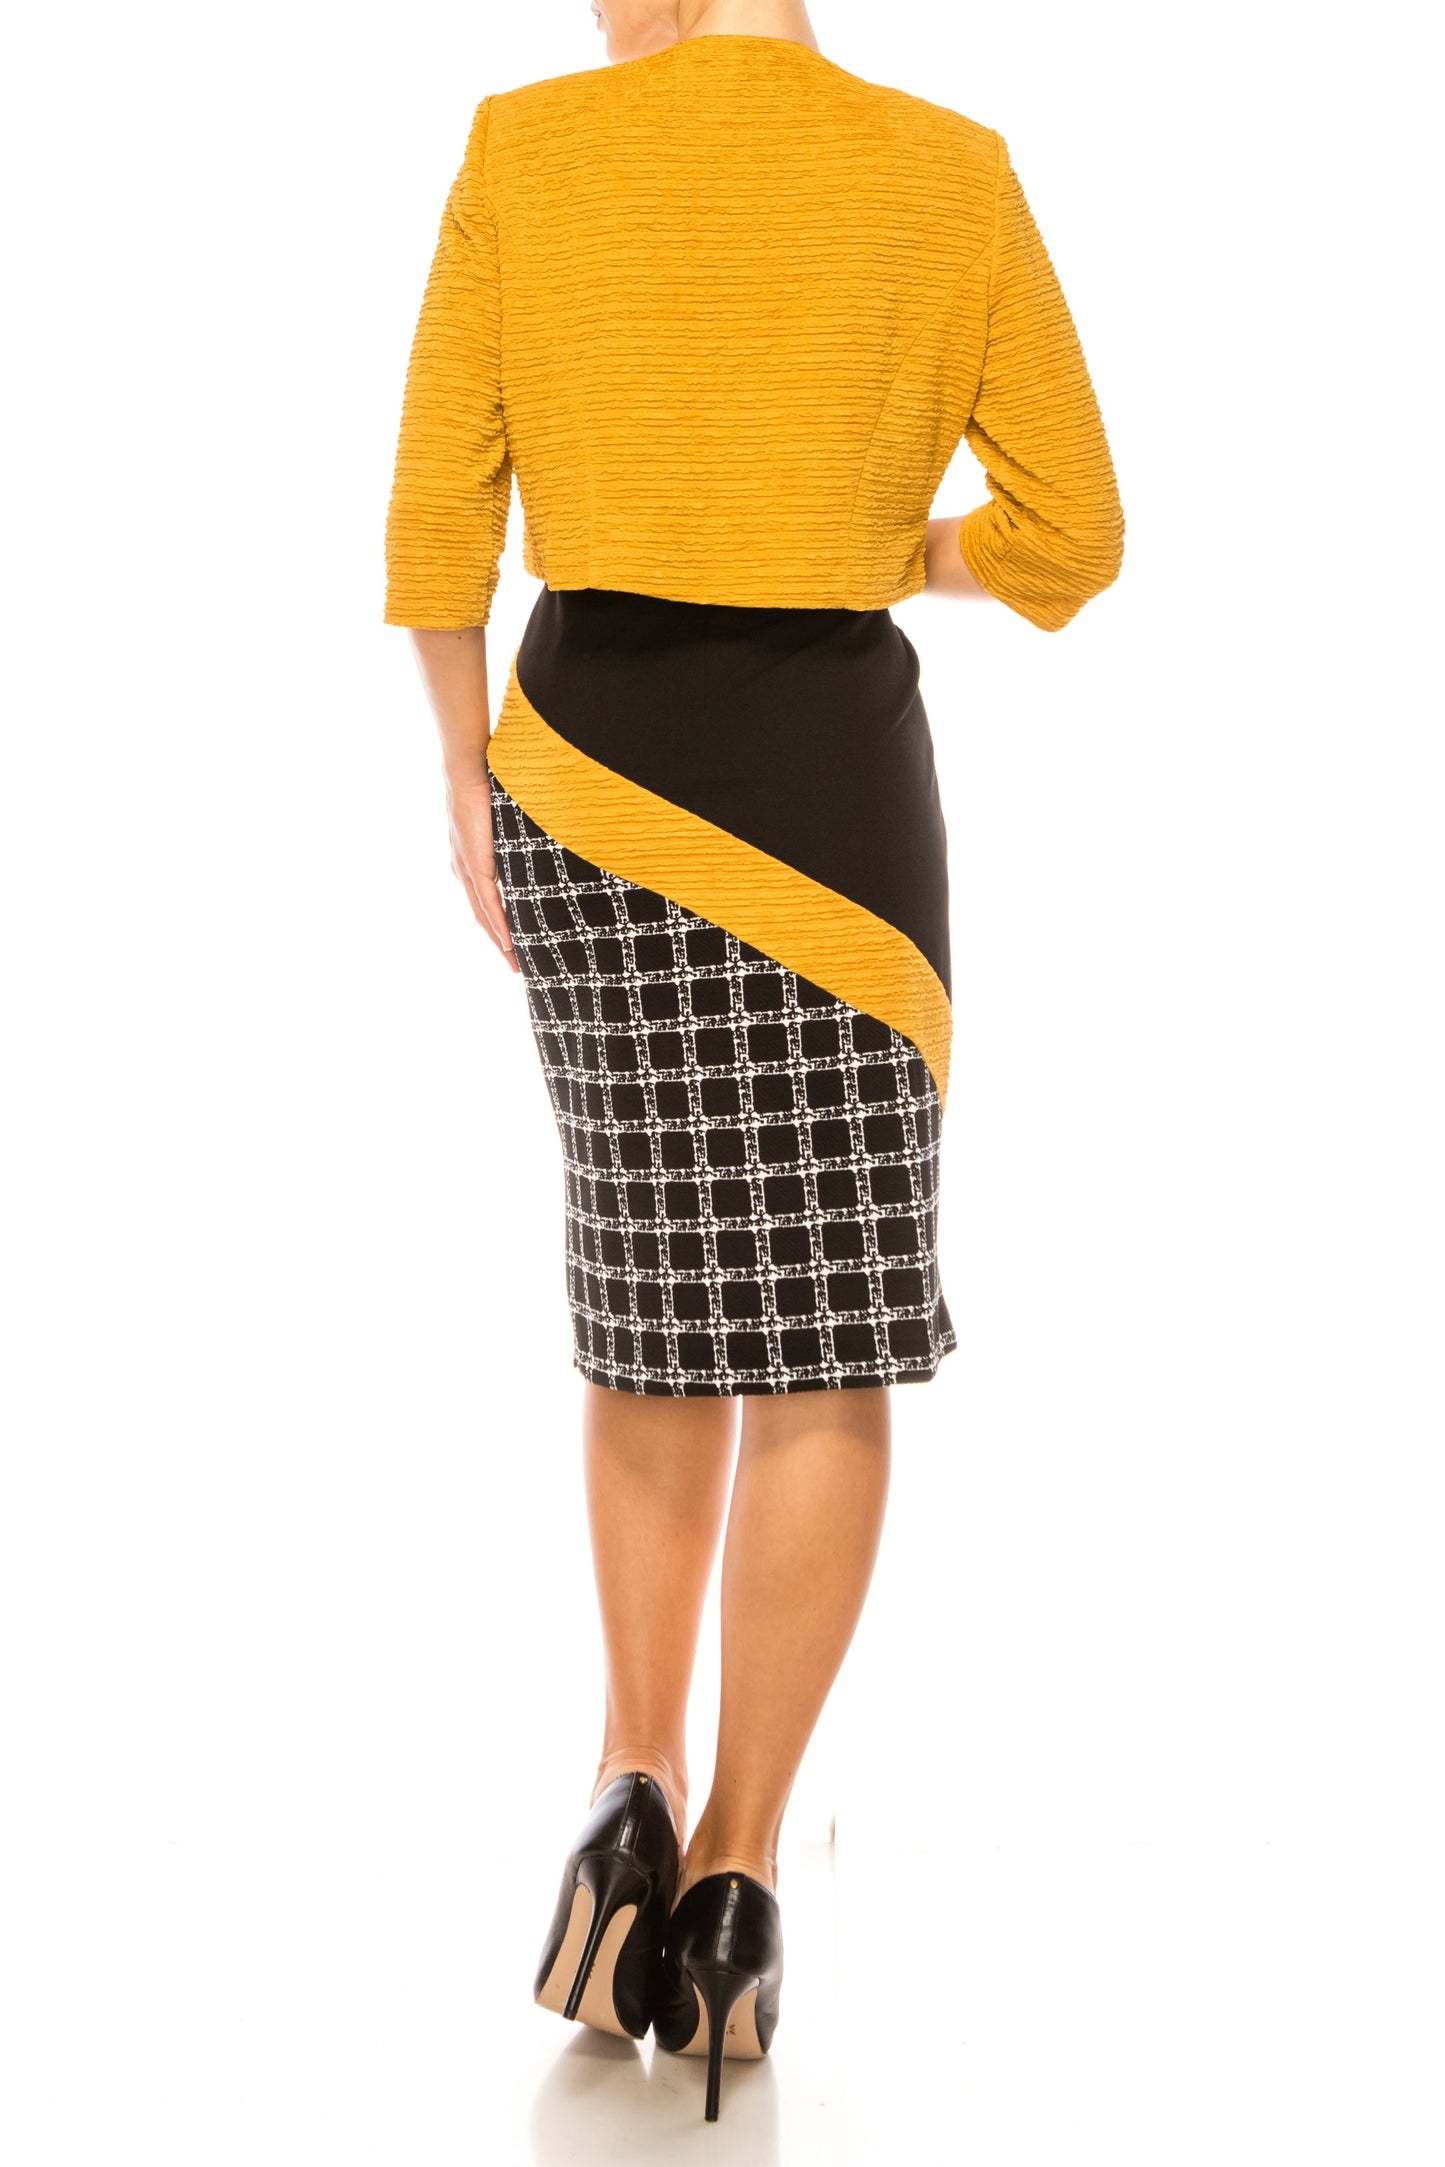 Sunny Noir Contrast: Yellow and Black Angled Jacket Dress